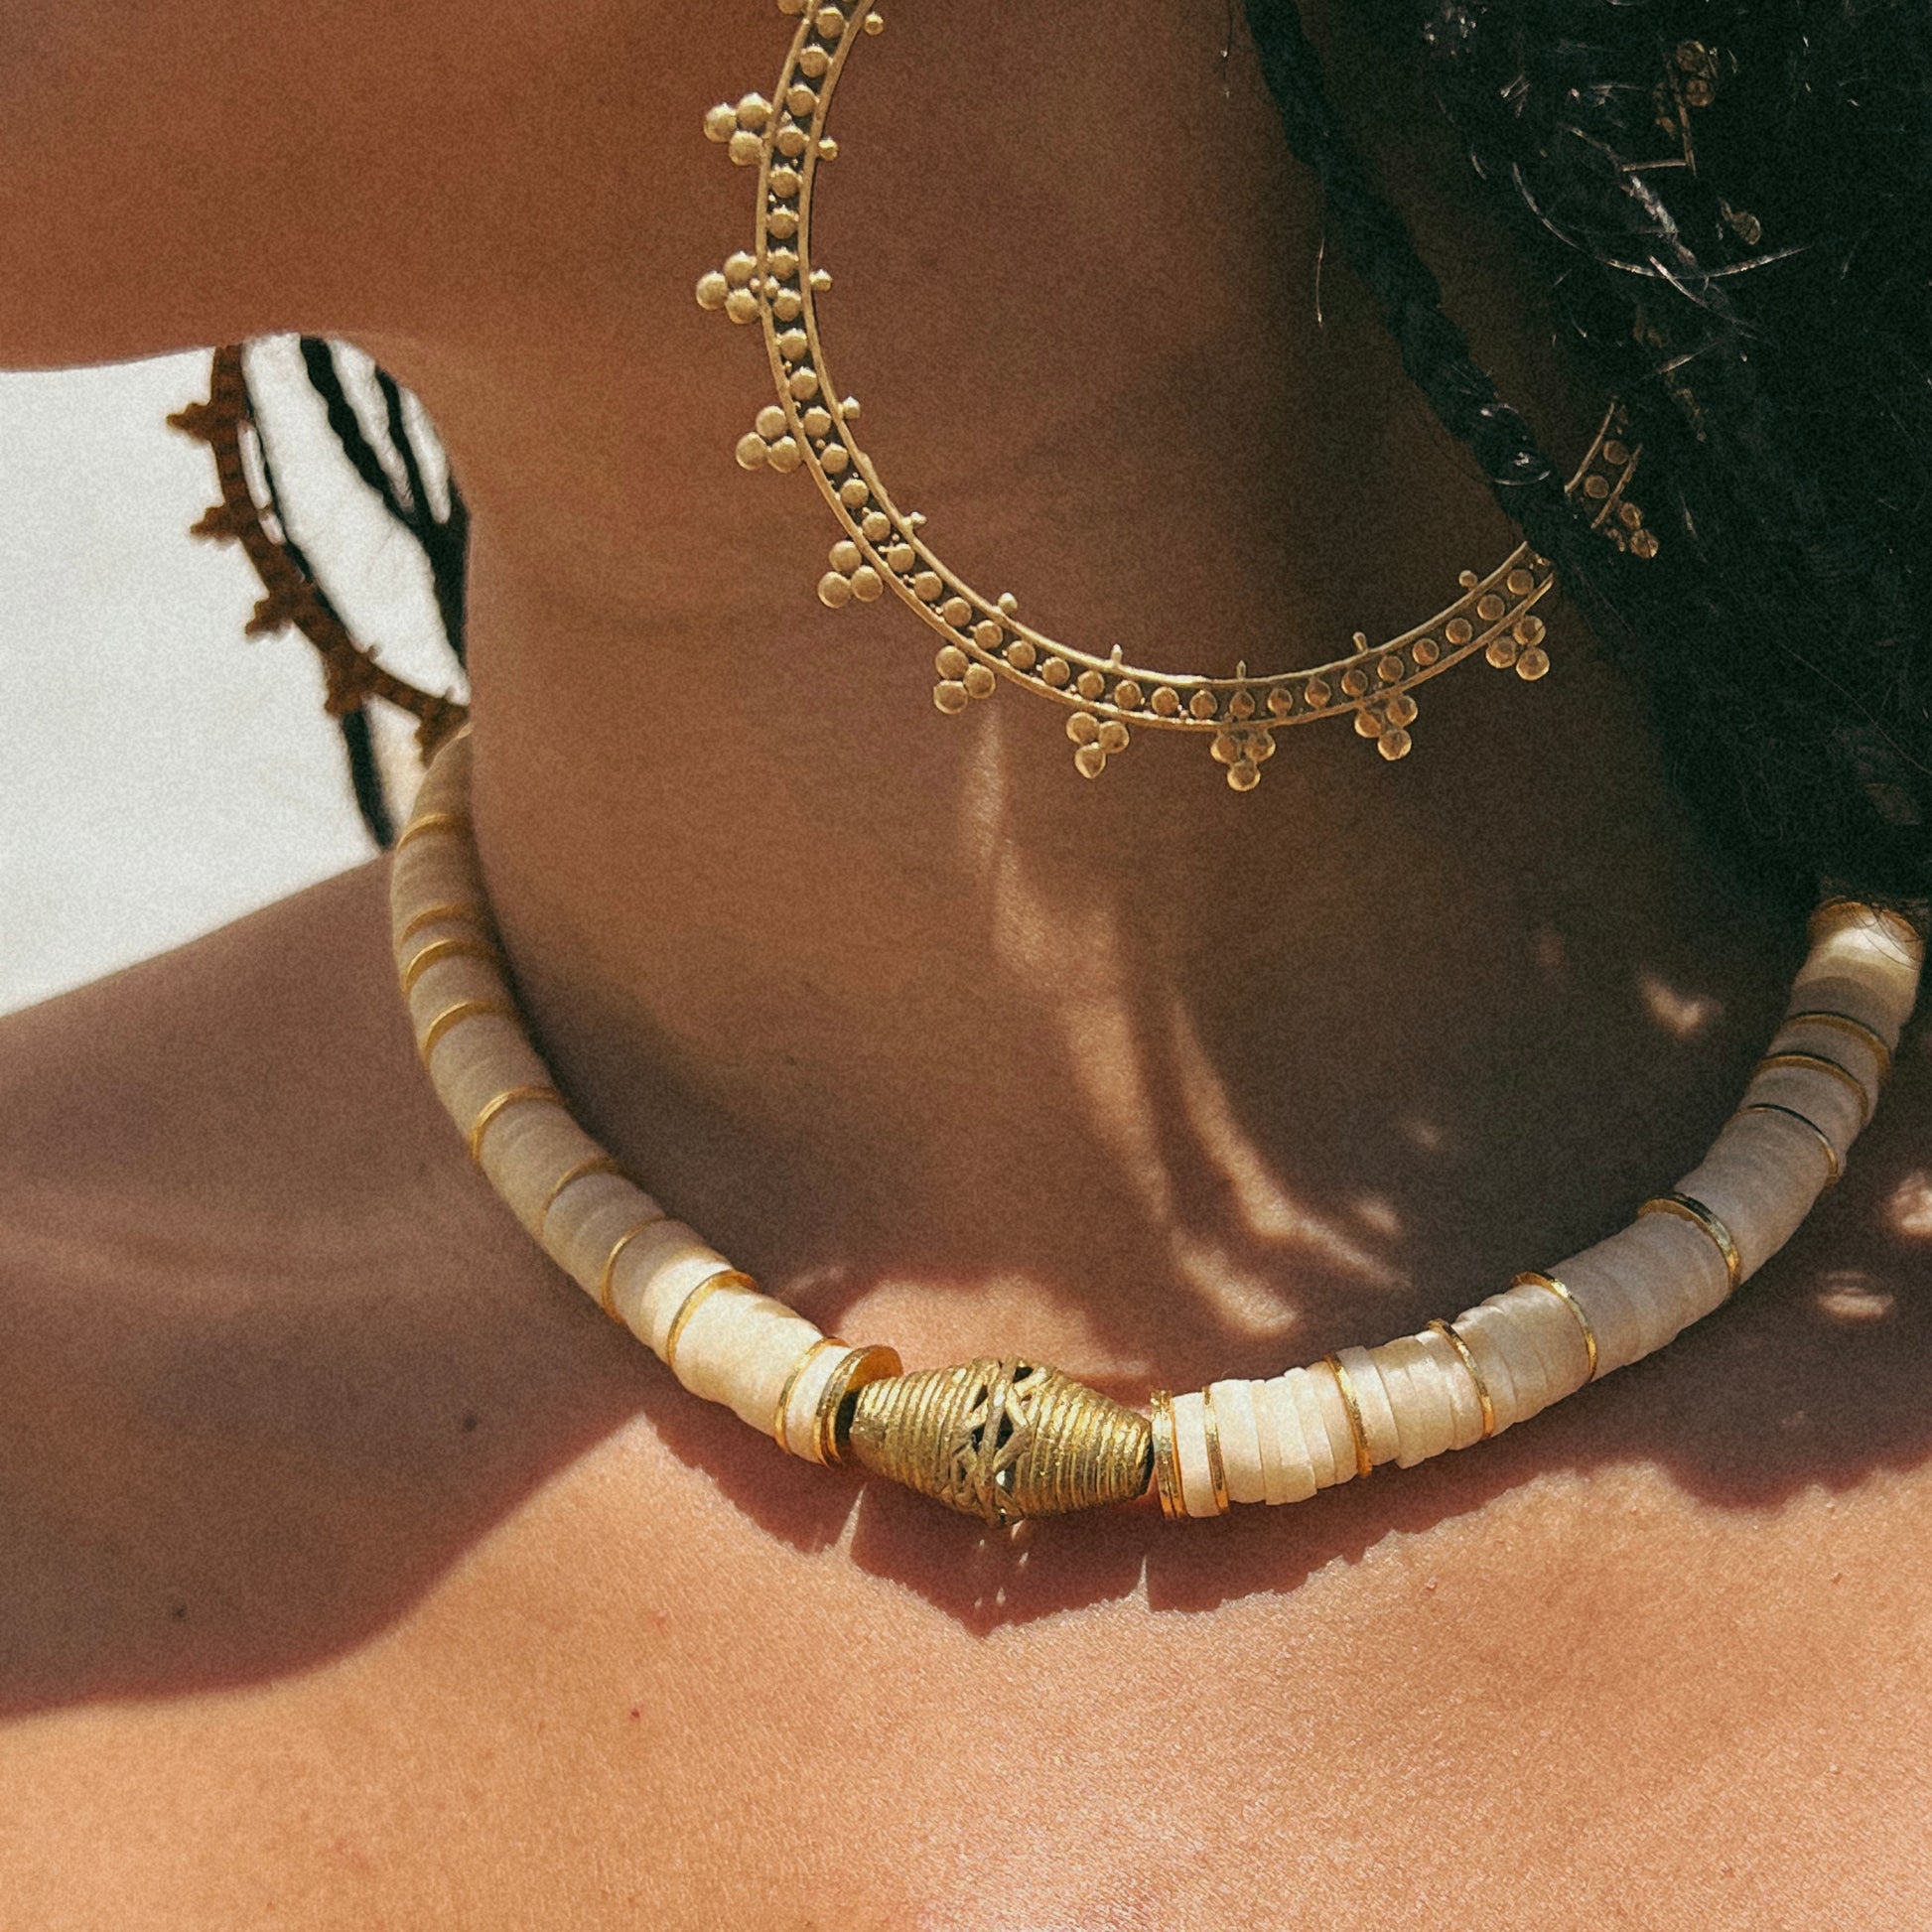 Shell necklace with gold spacers and a brass pendant on model